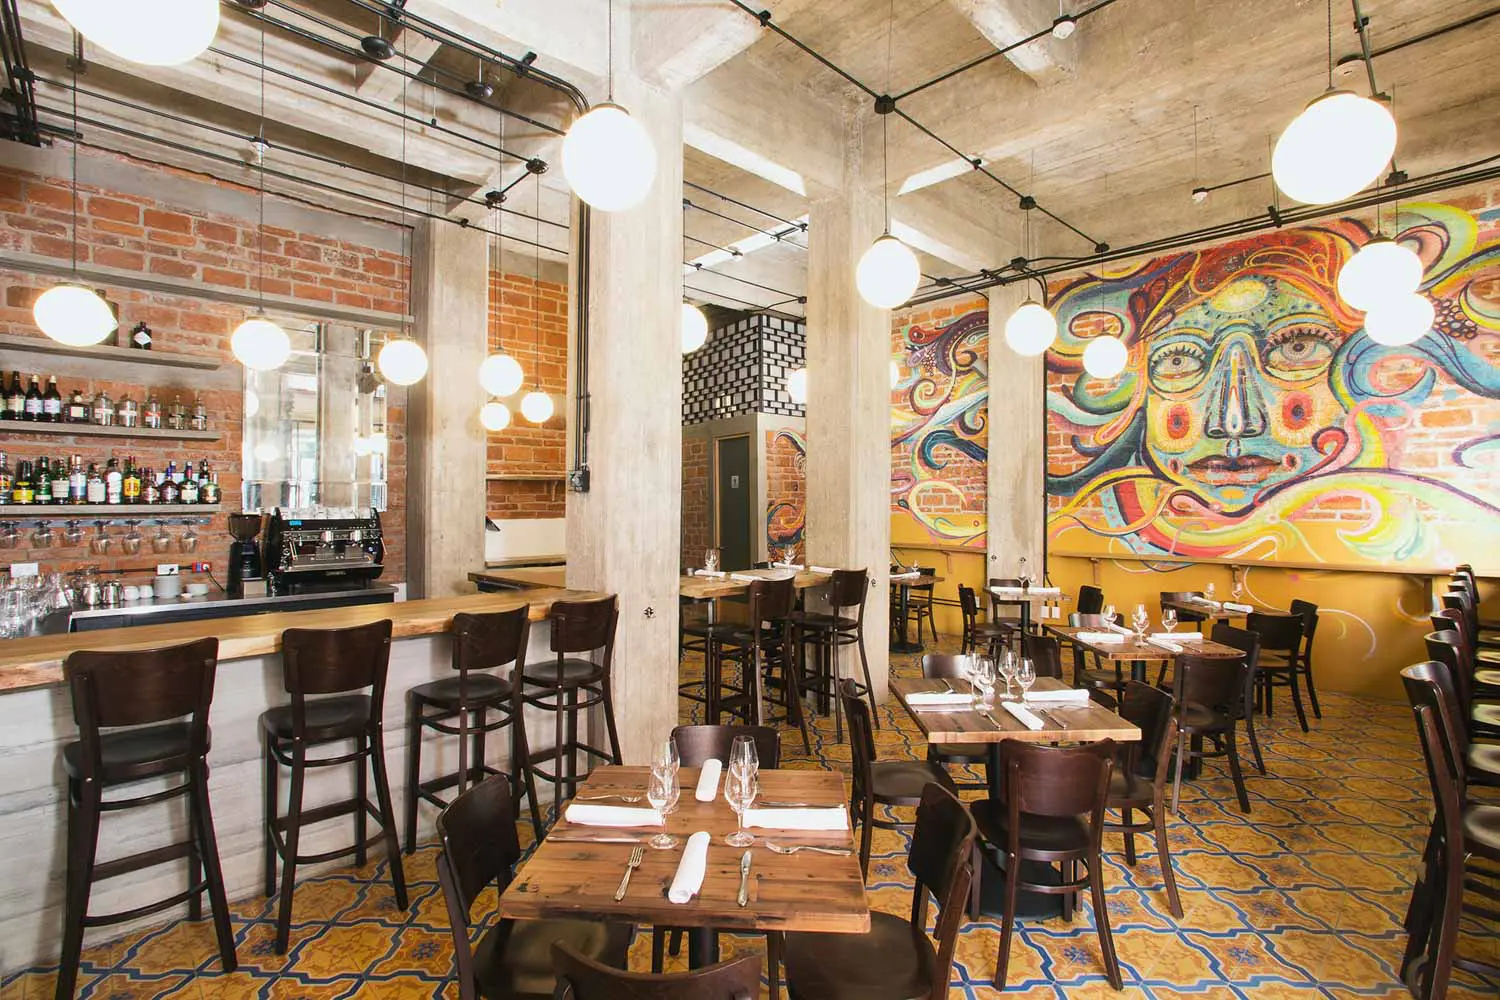 Amaya offers a Spanish-inspired fare